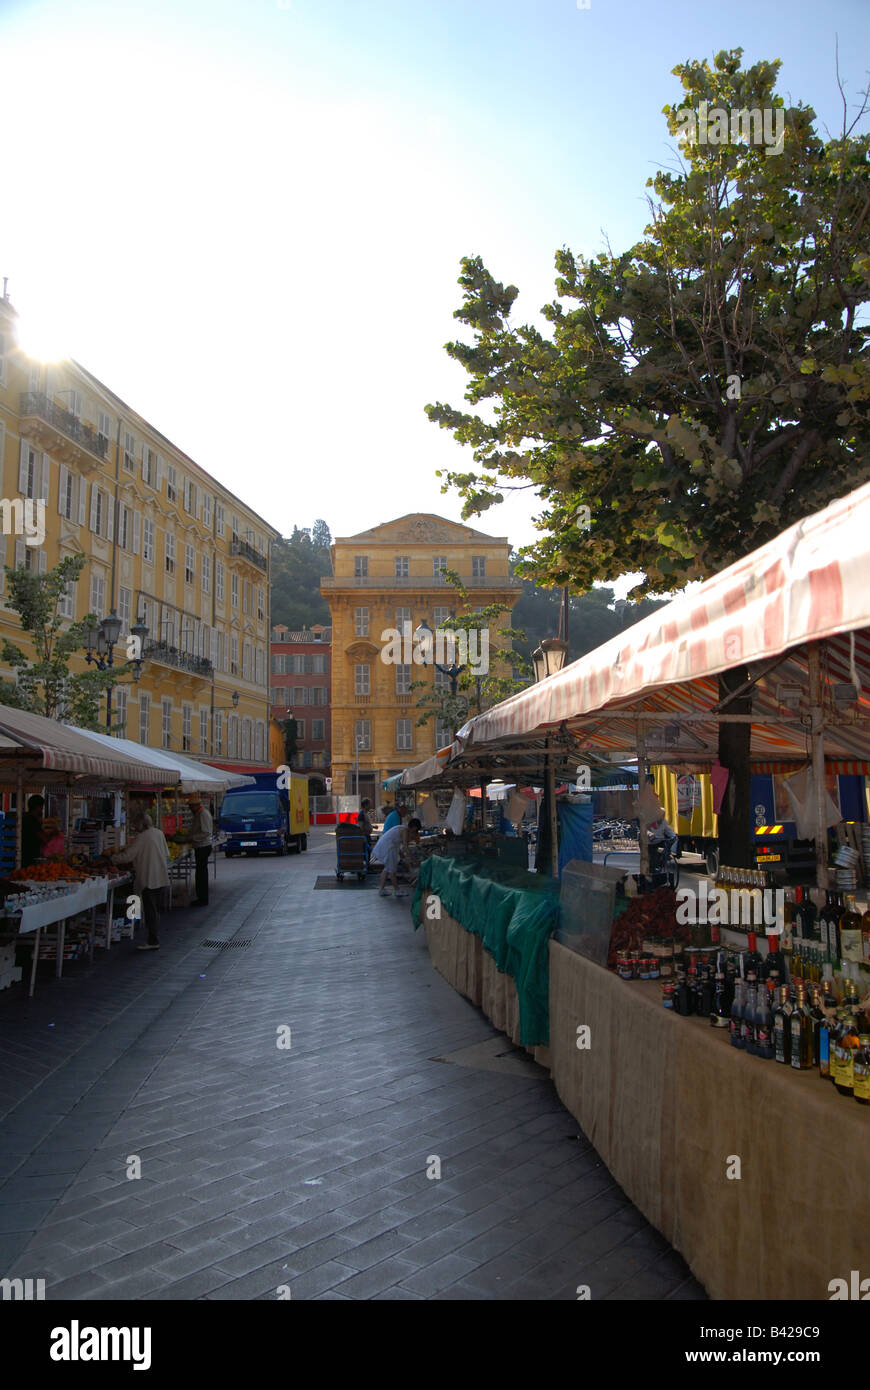 The market on the Cours Saleya in the old town Vieux Nice Nice Cote d Azur French Riviera France Stock Photo